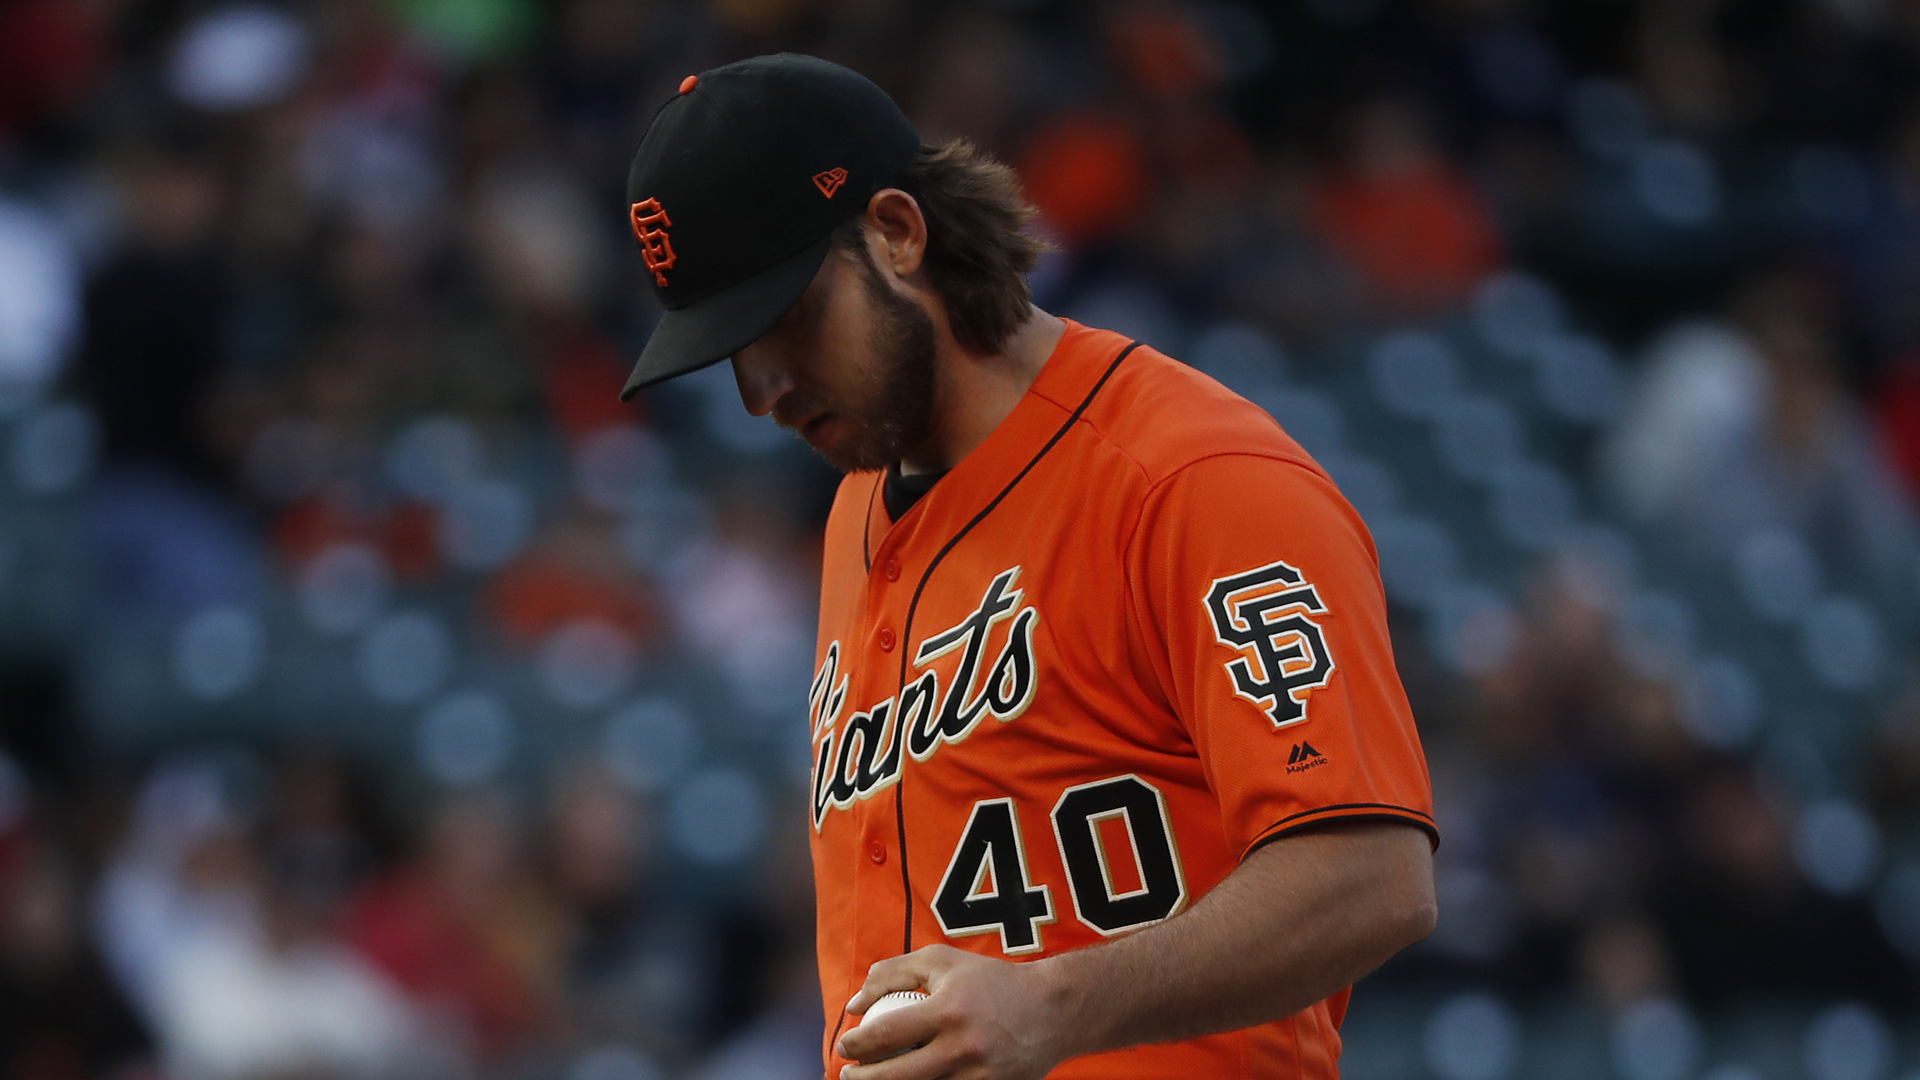 Bumgarner finished with a 6-7 record and a 3.26 ERA in 21 starts last season.